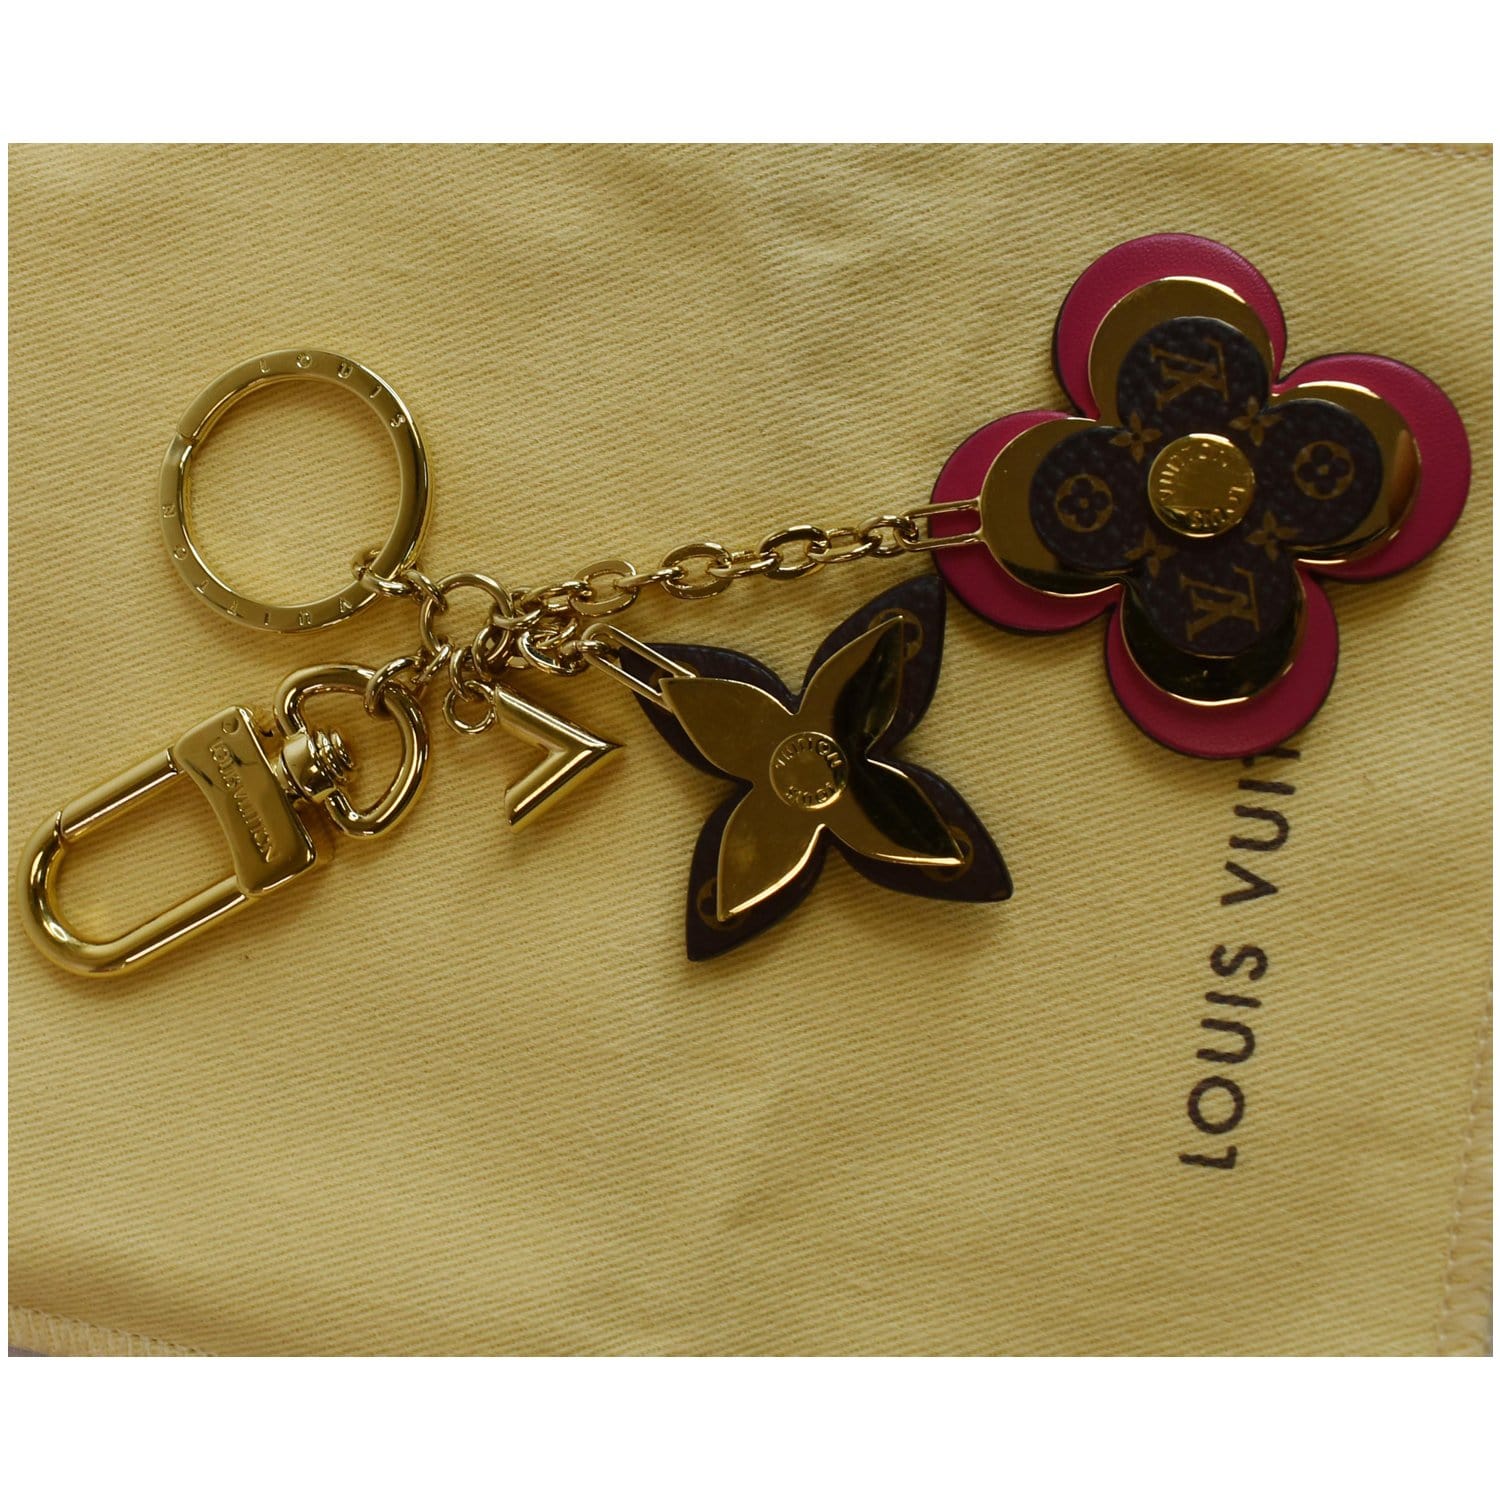 Blooming Flowers BB Bag Charm and Key Holder S00 - Accessories